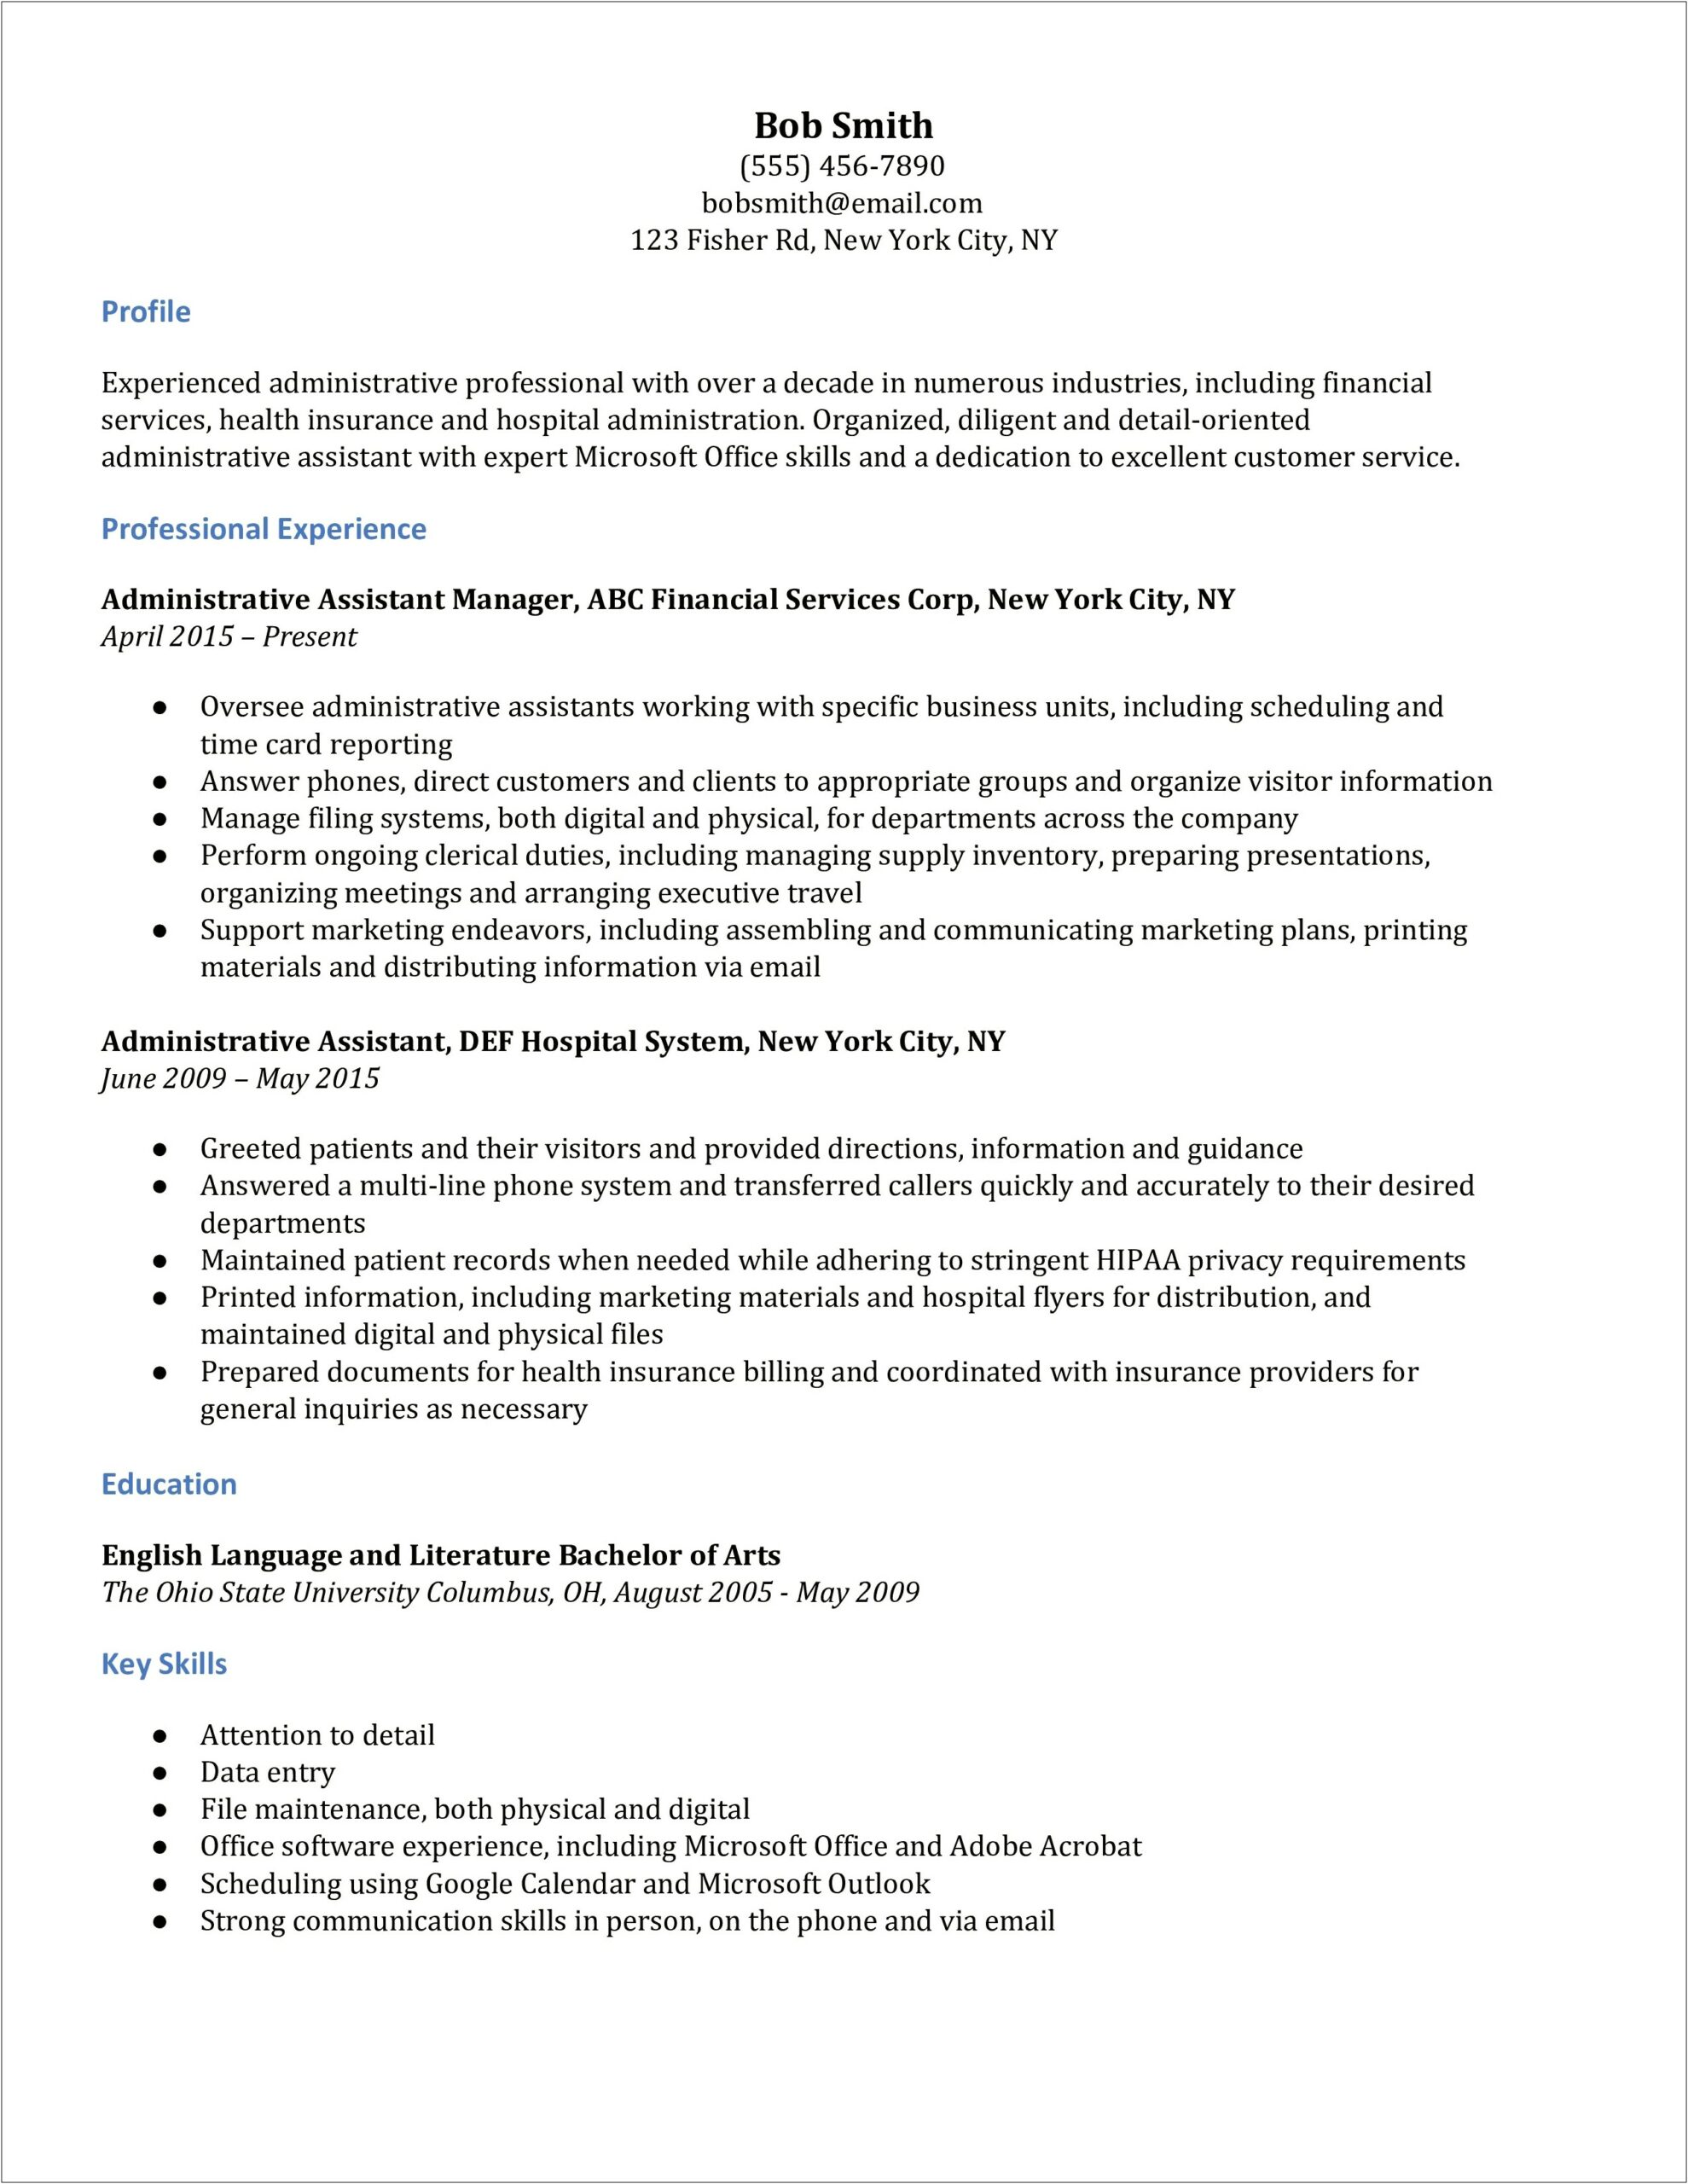 Skills To List On A Resume For Administrative